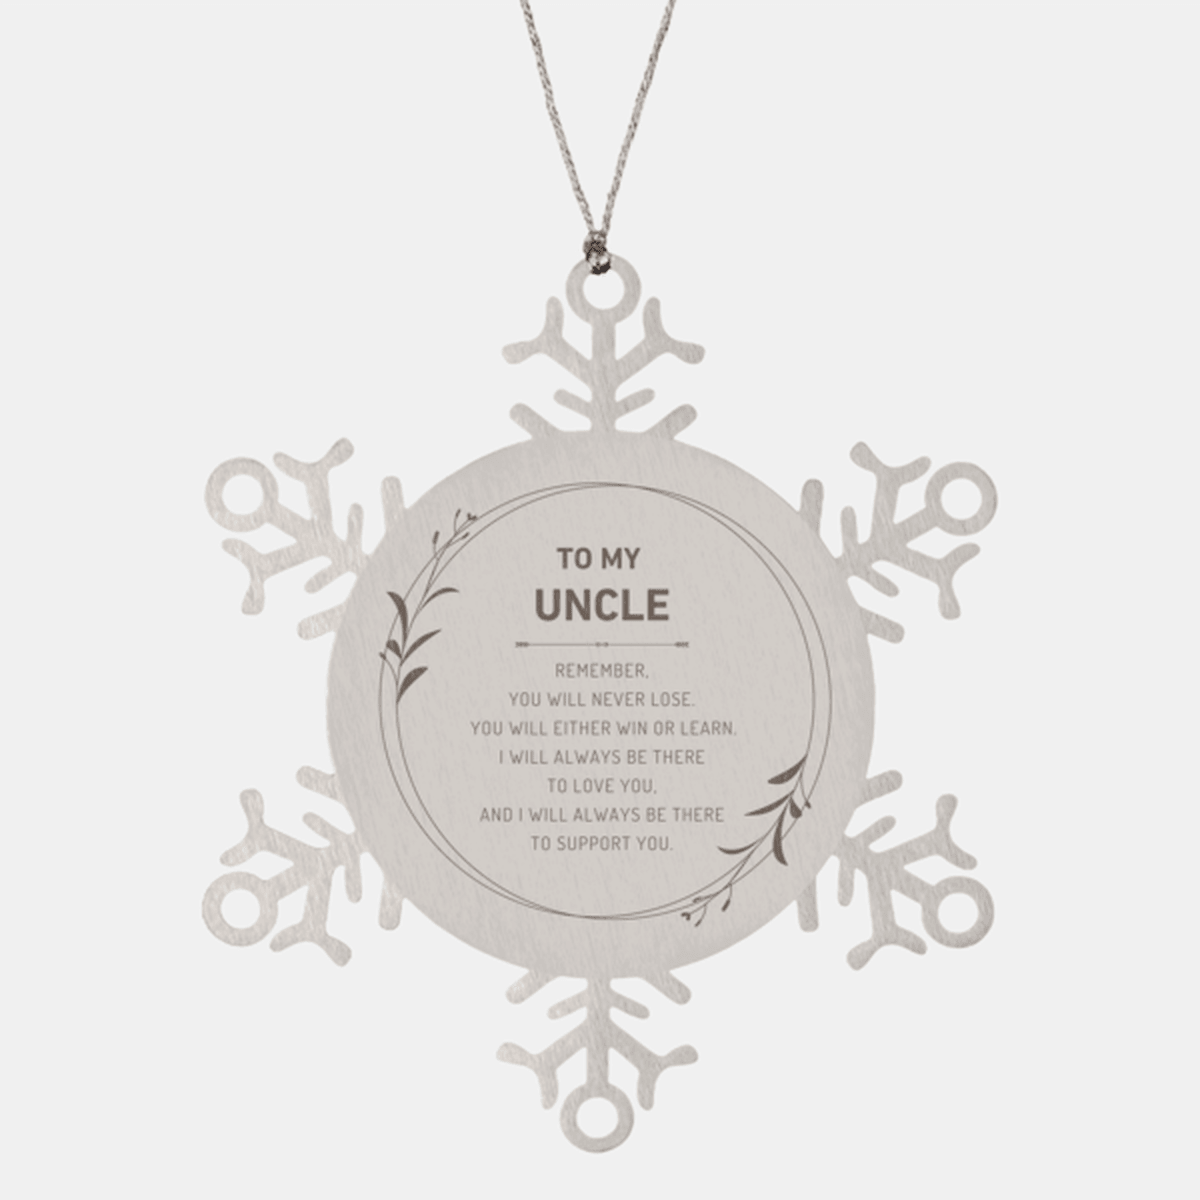 Uncle Ornament Gifts, To My Uncle Remember, you will never lose. You will either WIN or LEARN, Keepsake Snowflake Ornament For Uncle, Birthday Christmas Gifts Ideas For Uncle X-mas Gifts